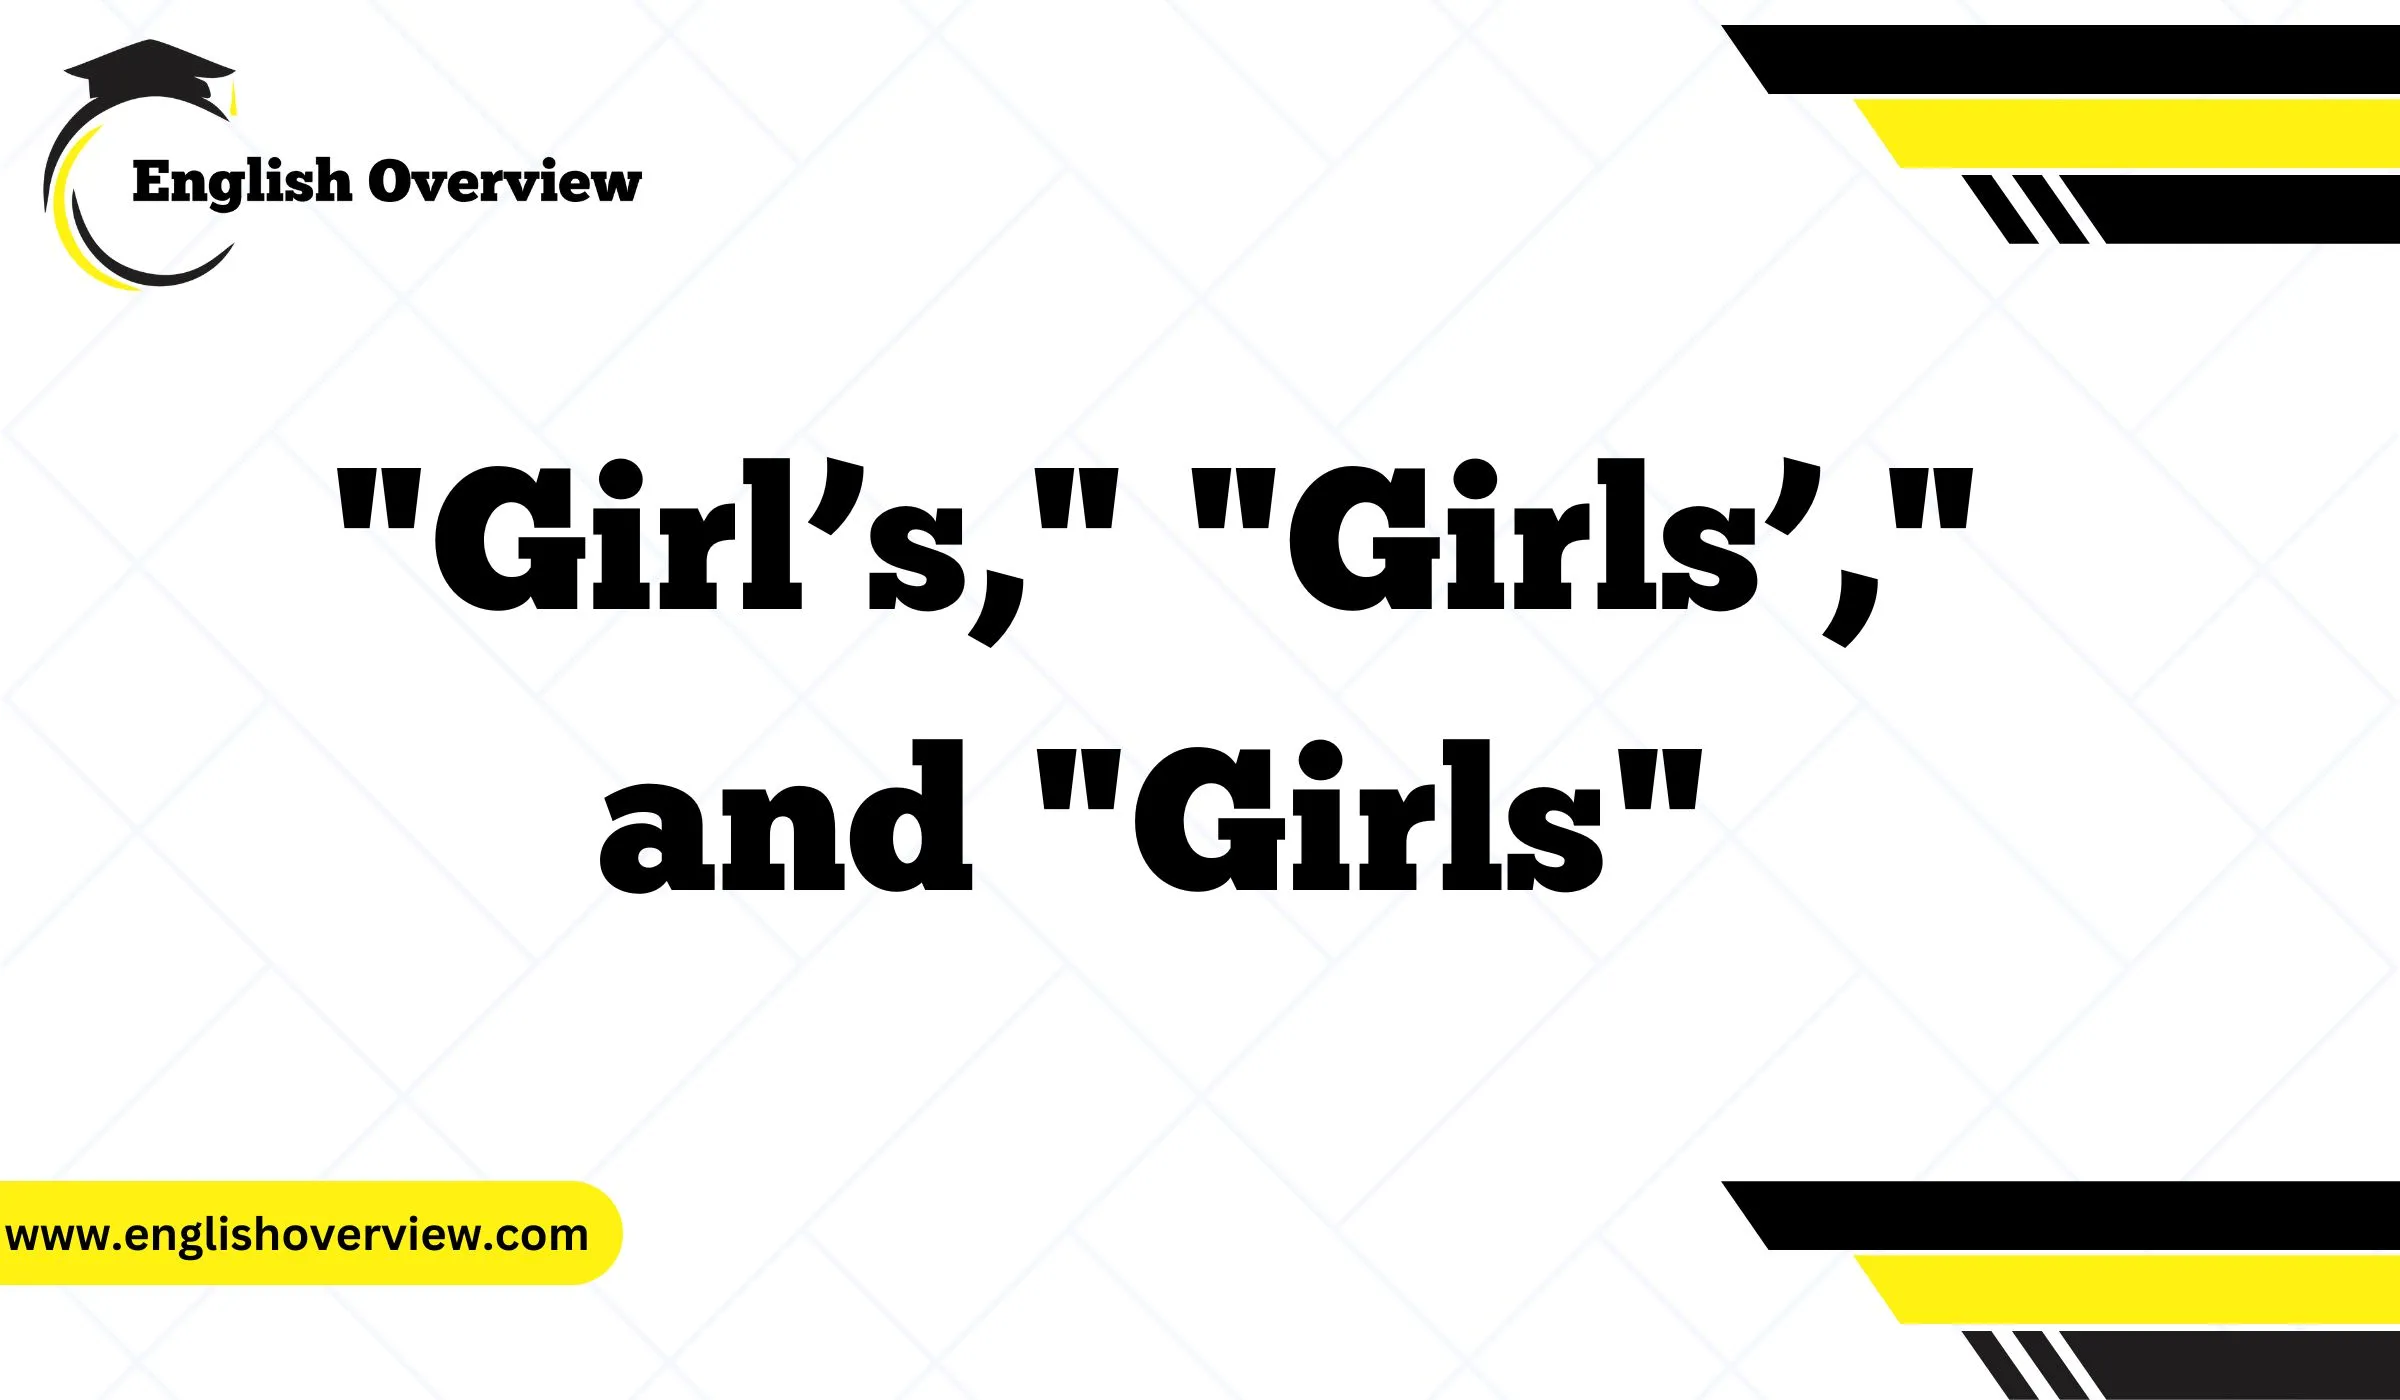 Understanding "Girl’s," "Girls’," and "Girls": A Simplified Guide